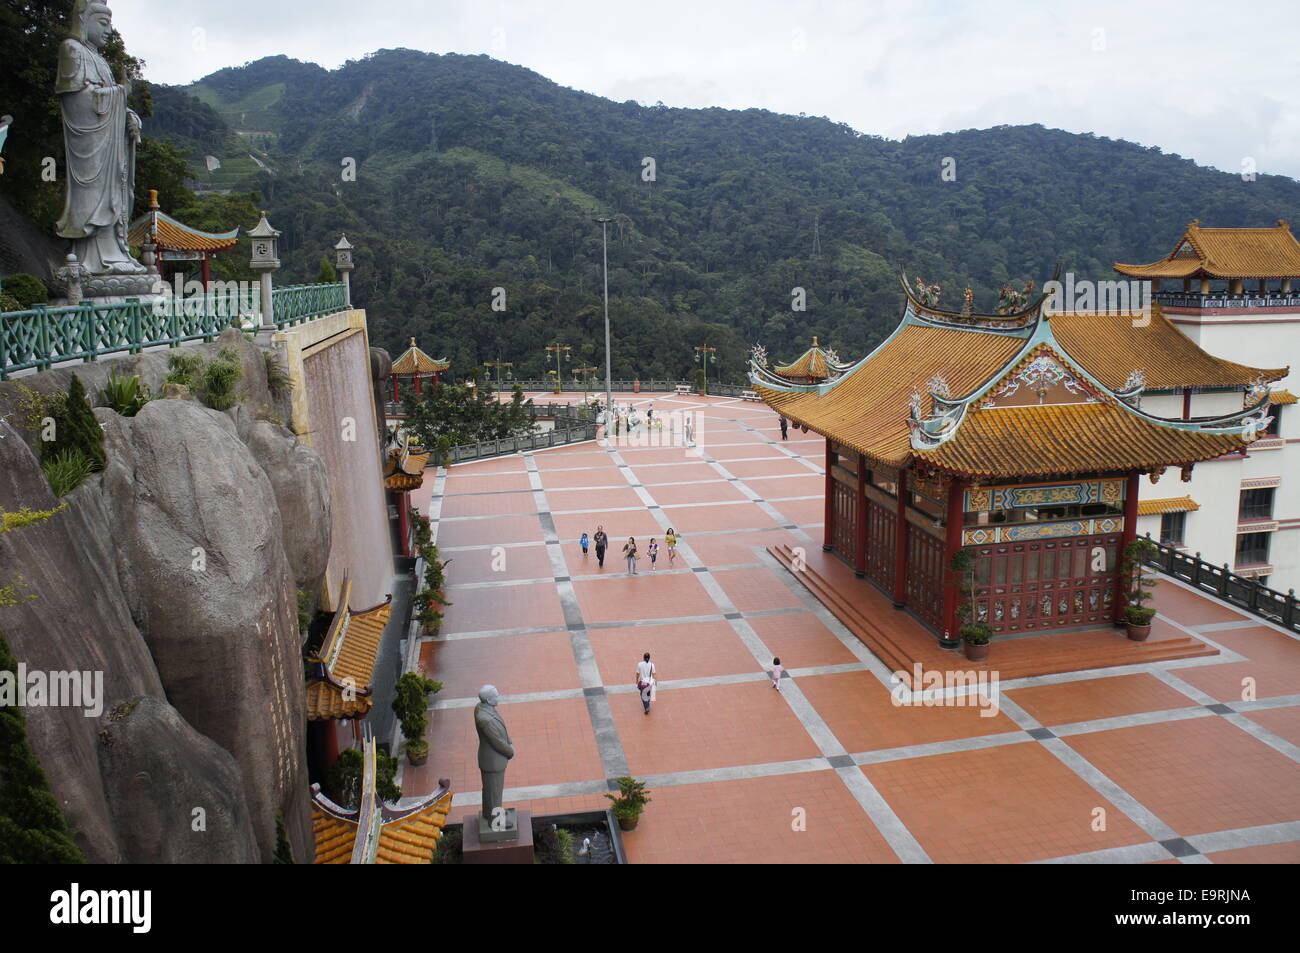 Chin Swee temple, Cameron Highlands, Malaisie Banque D'Images